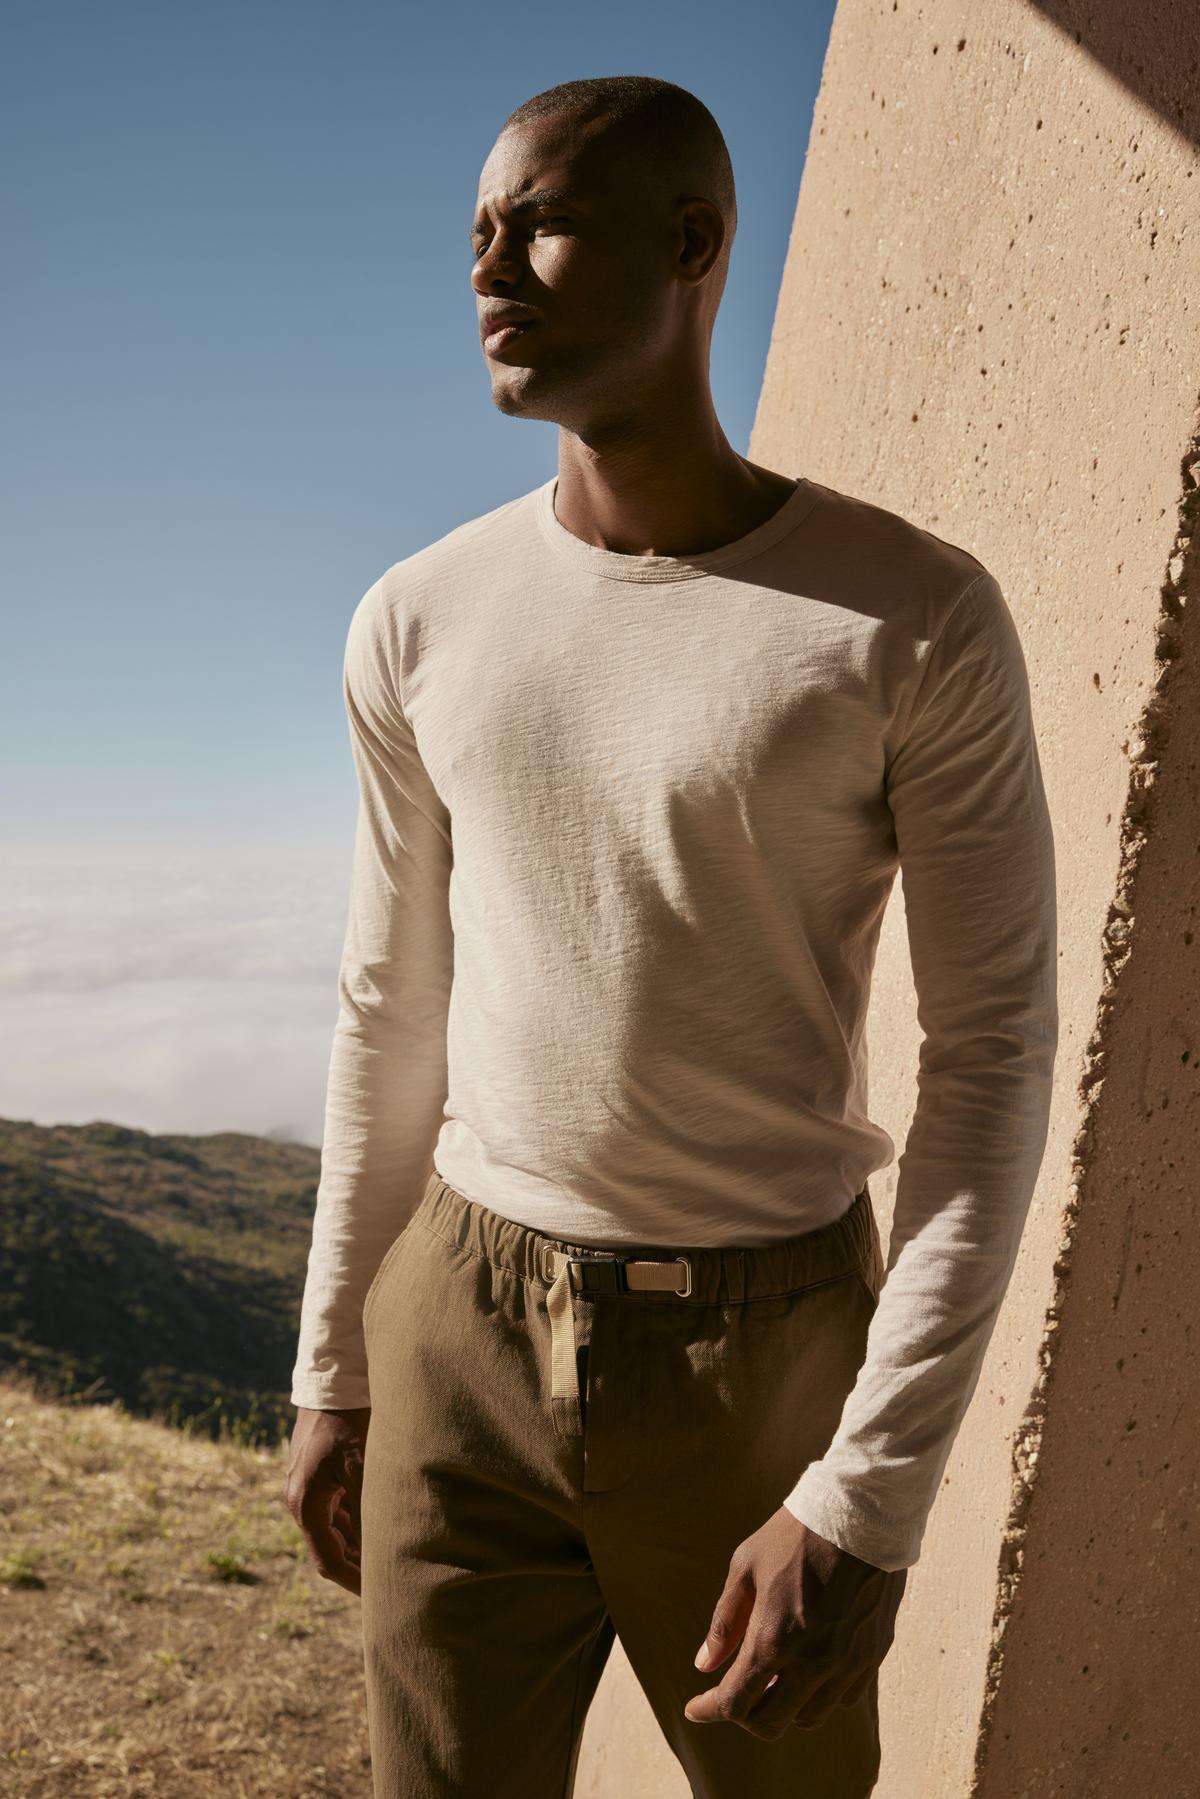   A man in a white KAI CREW NECK TEE by Velvet by Graham & Spencer and khaki pants is standing in front of a mountain. 